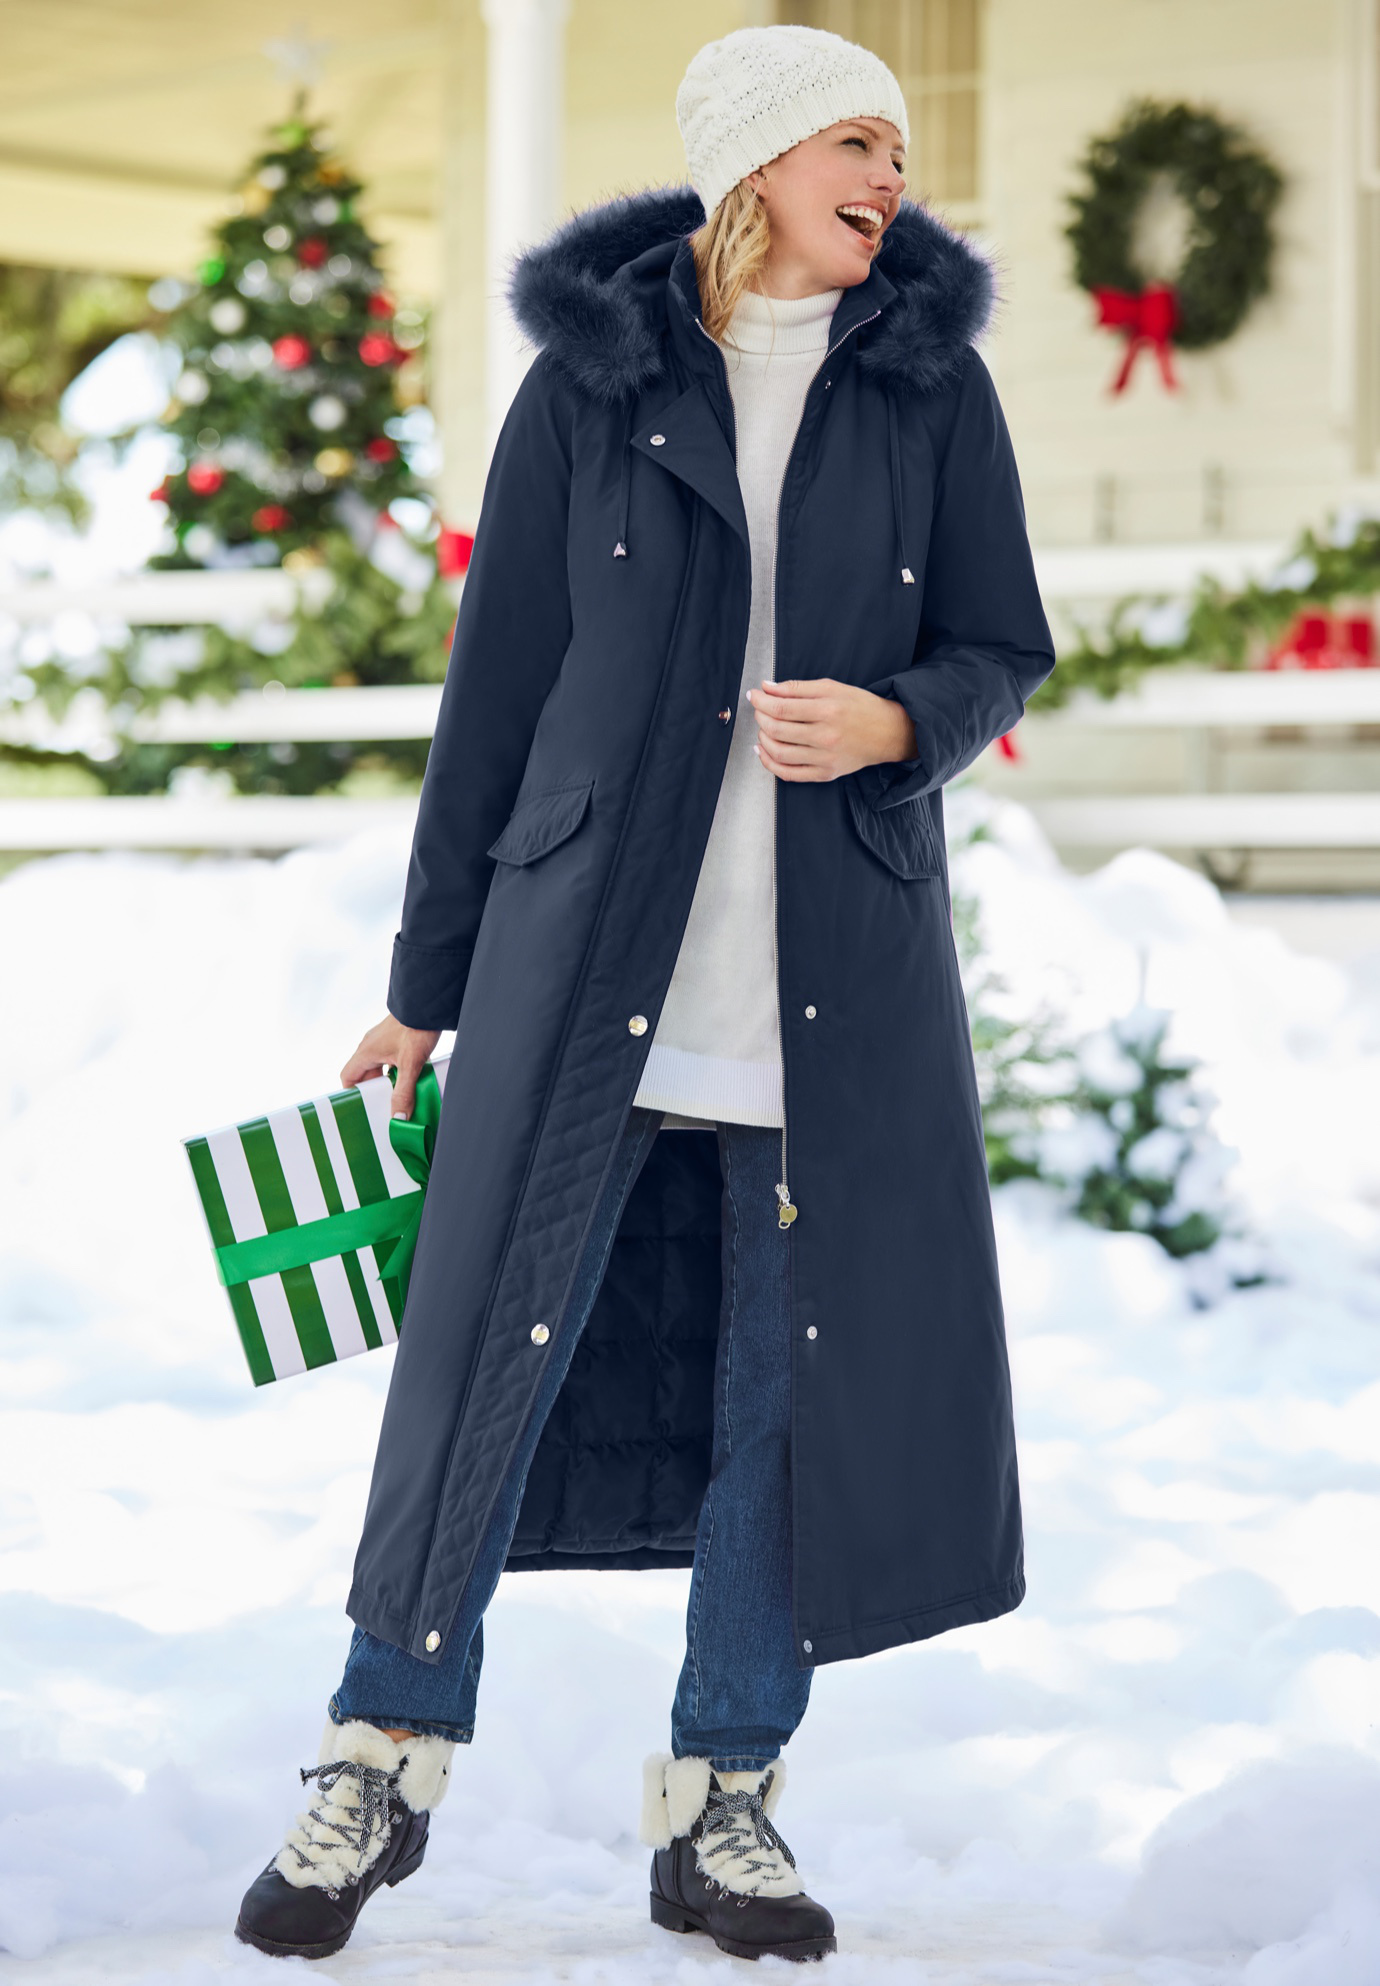 Woman Within Women's Plus Size Long Hooded Down Microfiber Parka Coat - image 3 of 3